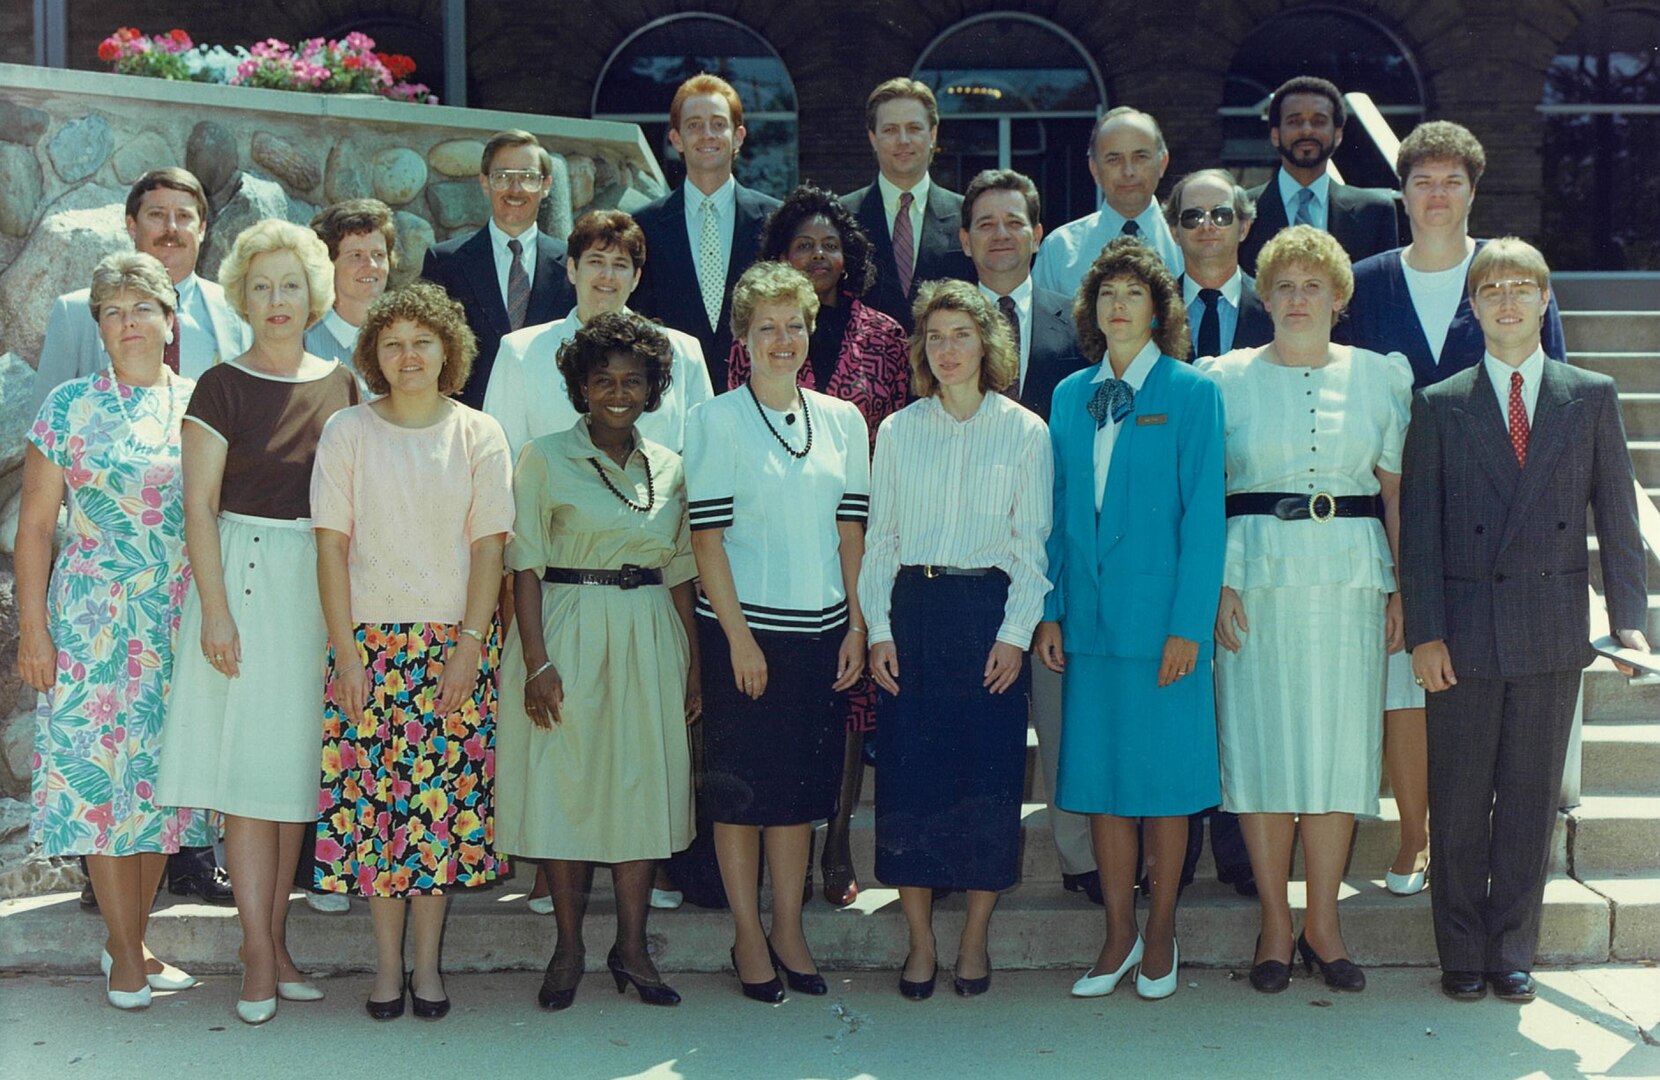 Group photo of the Pathways to Career Excellence Program class in the late 1980s.